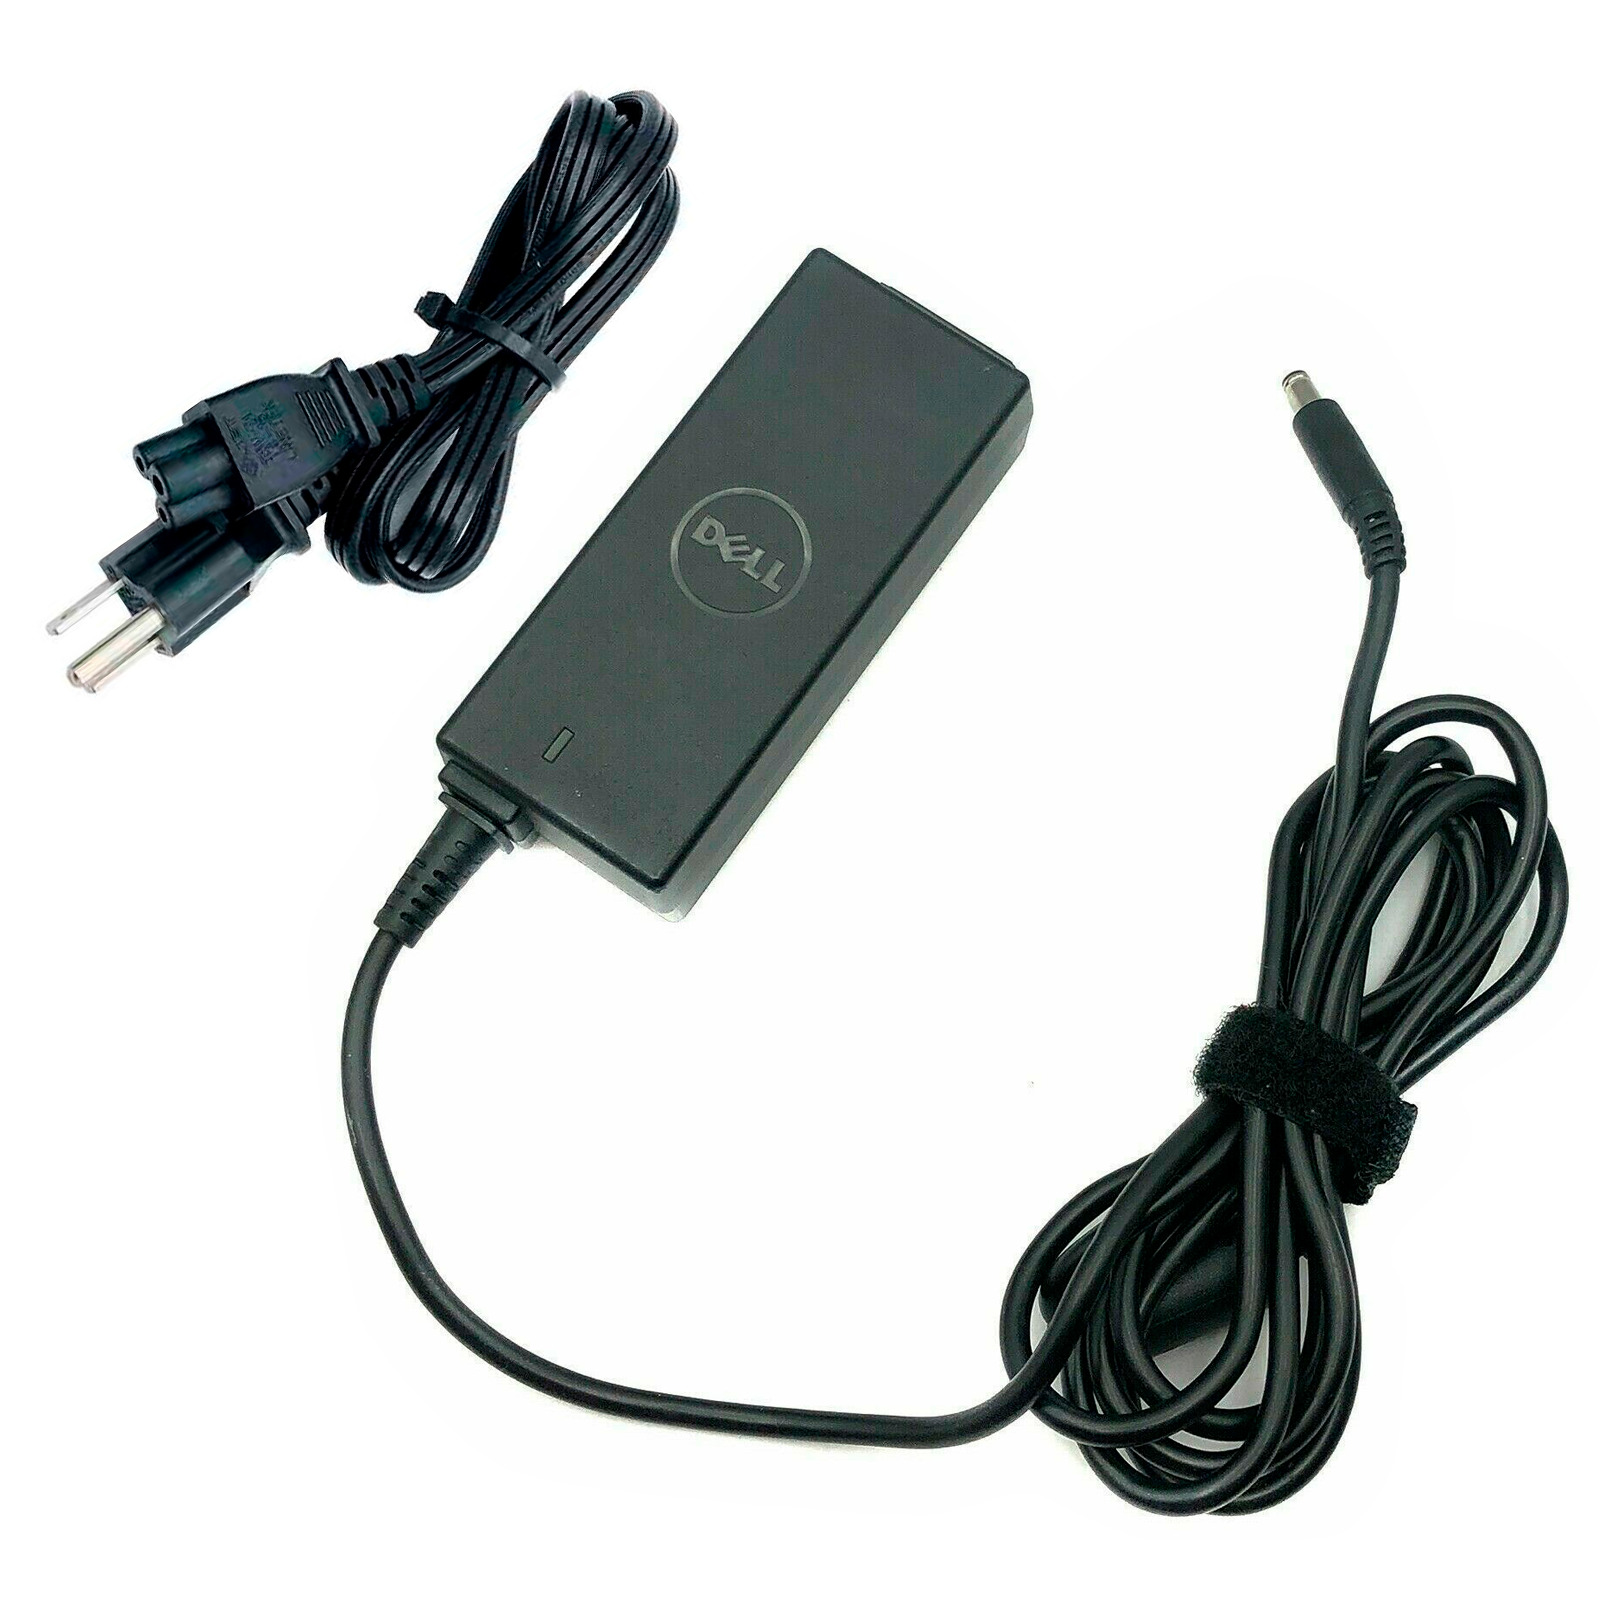 NEW Authentic Dell 45W AC Power Adapter Charger for XPS 11 9P33 Laptop w/Cord